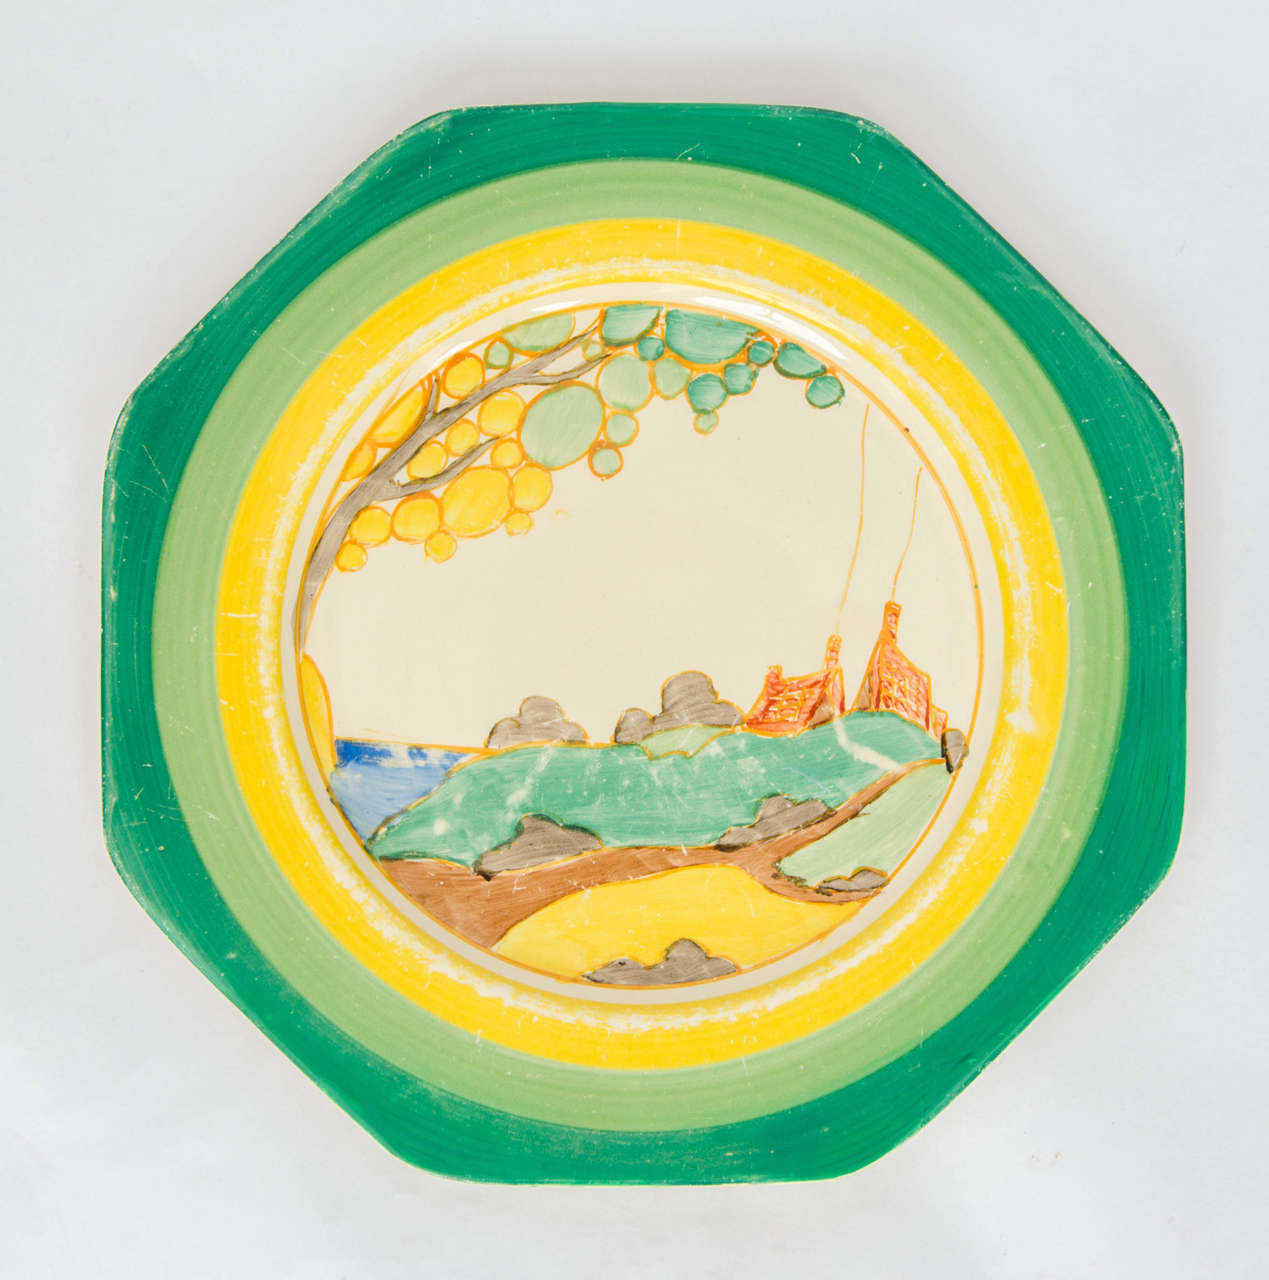 This is a hand-painted Clarice Cliff plate in the classic landscape Bizarre pattern called; Secrets.

The plate is octagonal and has the two-tone green and yellow banding color way (there was a later version with orange banding).

The plate is